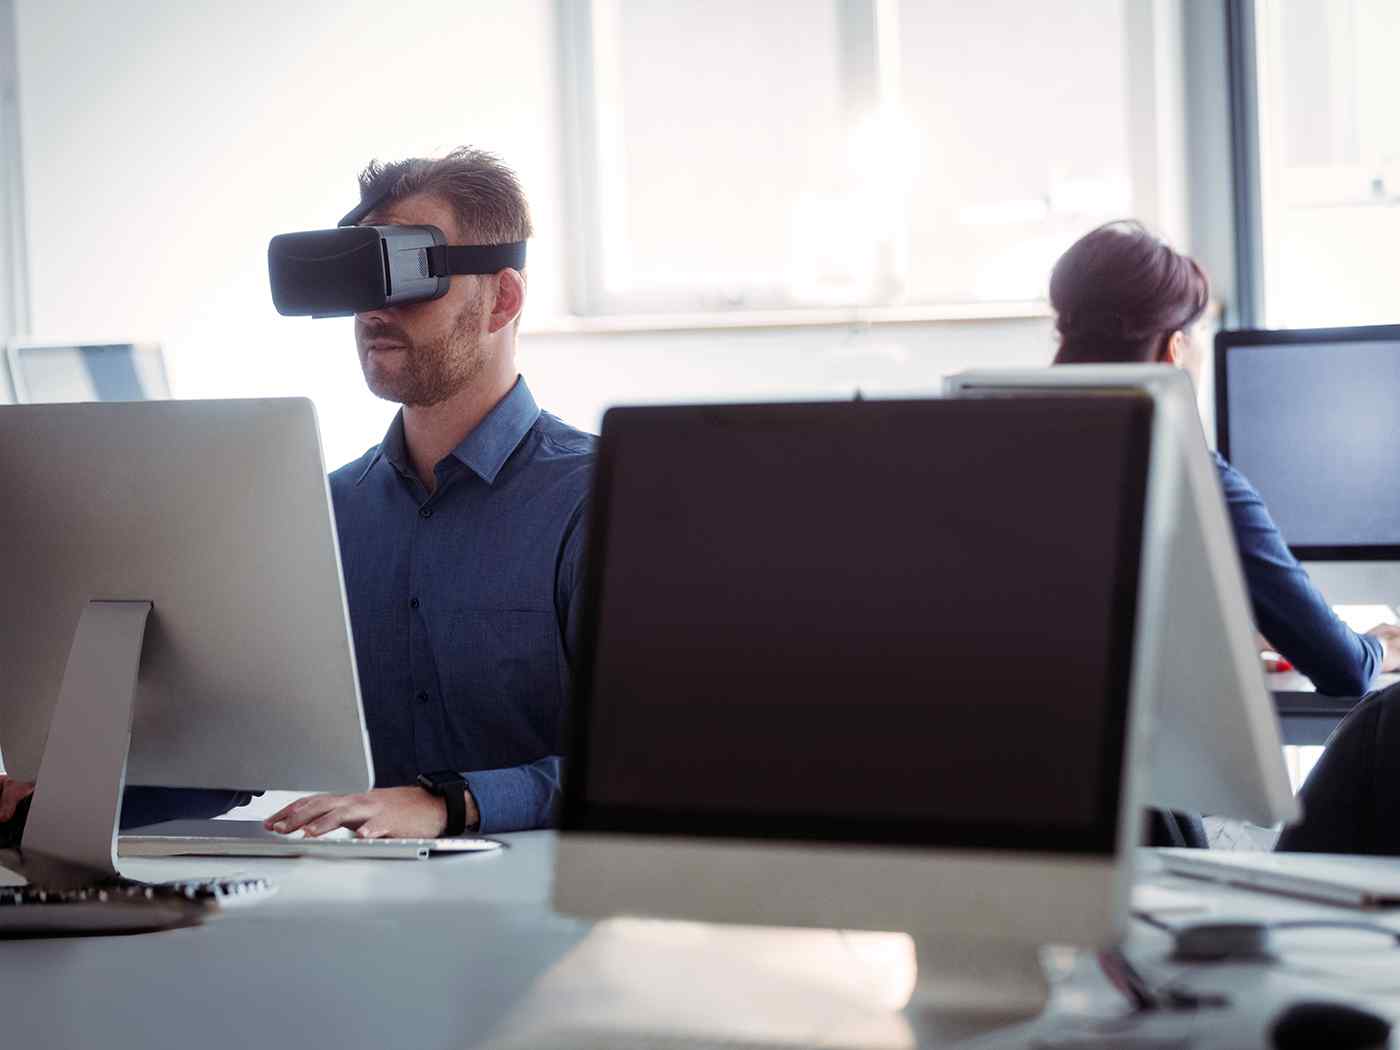 Game design student wearing Virtual Reality headset while working on a computer.